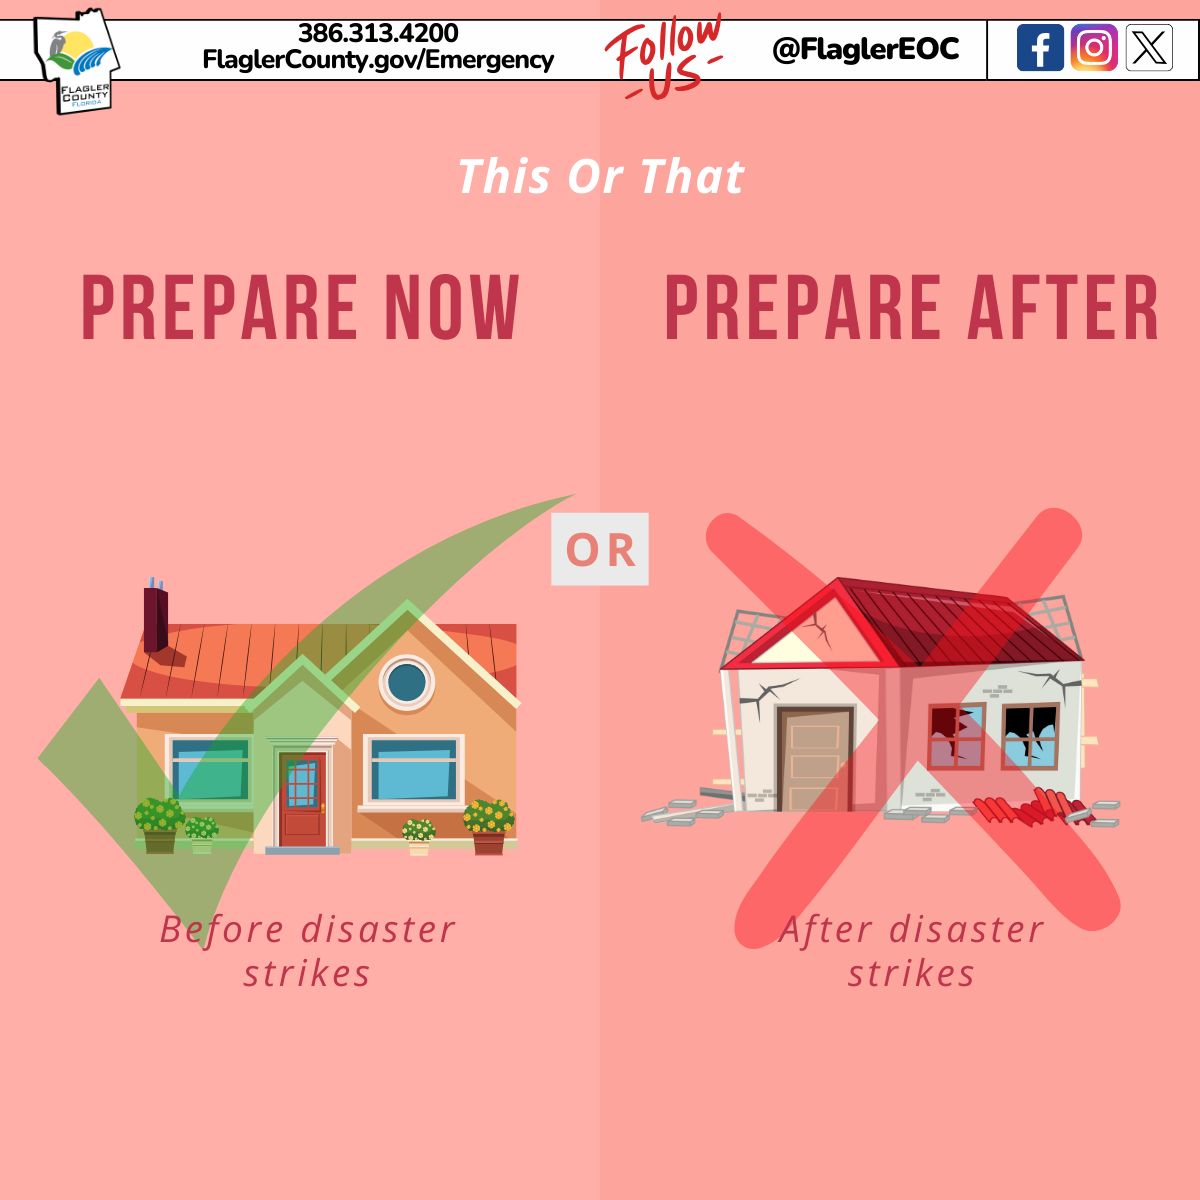 Do you want to prepare before disaster strikes or after? 
Some people say they thrive on chaos. We don't recommended that. After is highly unpredictable 

Visit Flaglercounty.gov/emergency to learn how you can be prepared before disaster strikes 

#Flaglercounty #flaglereoc #beready